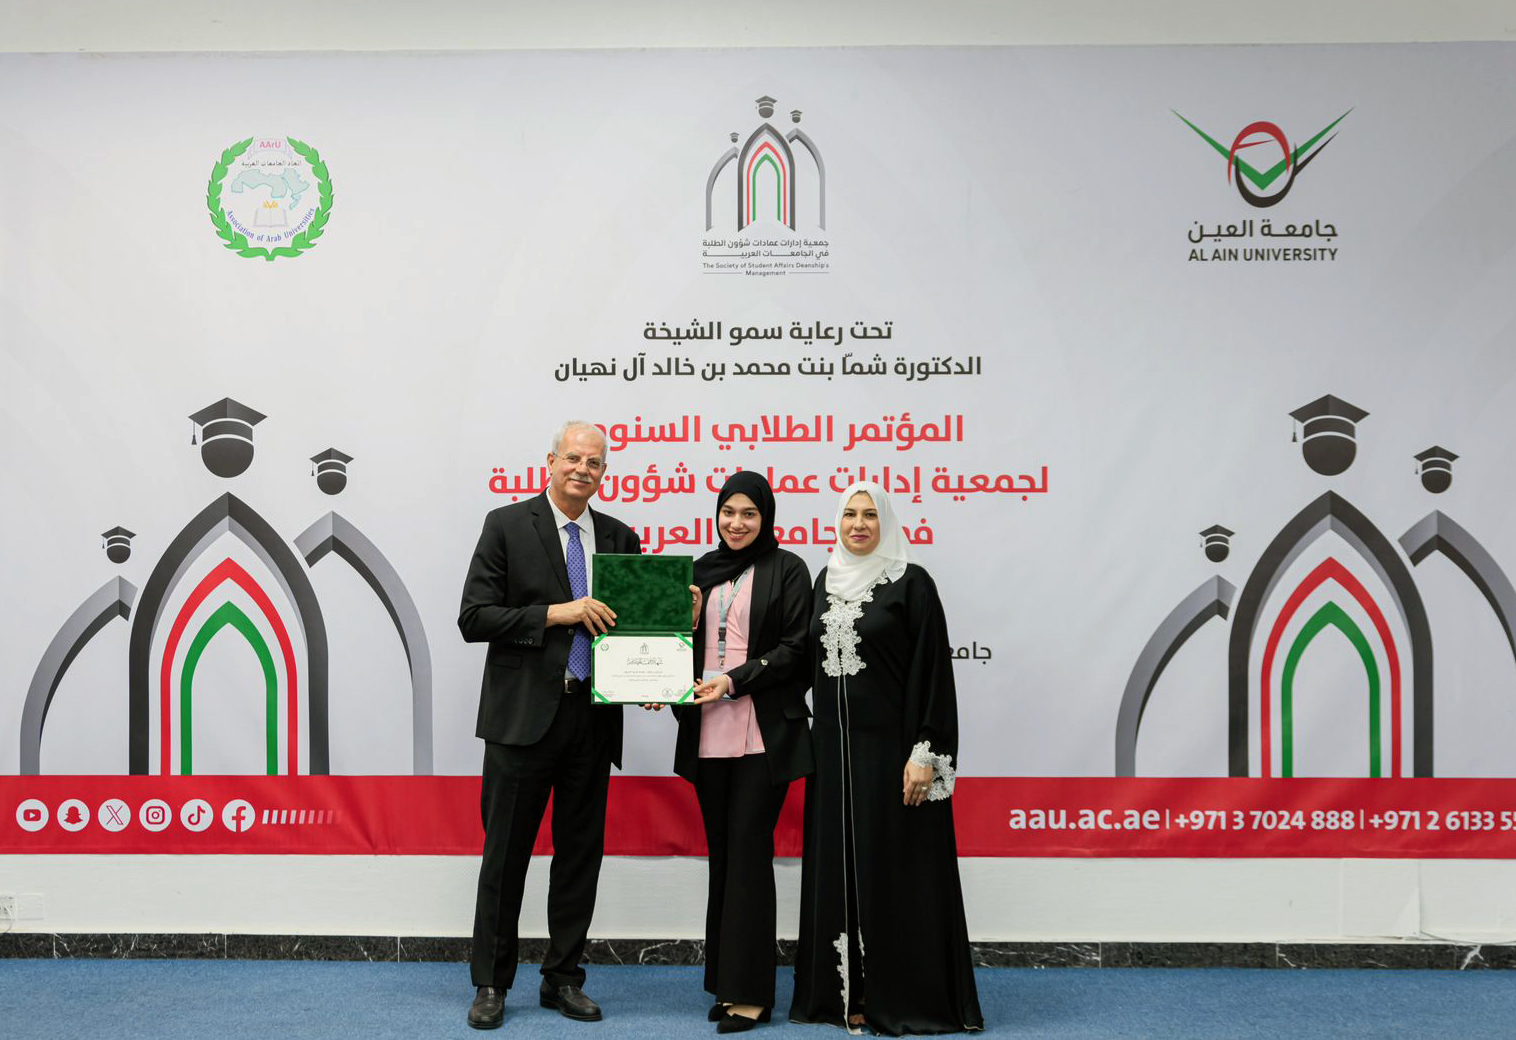 Arab American University Participates in the Activities of the First Student Conference of the Association of Deans of Student Affairs at Al Ain University